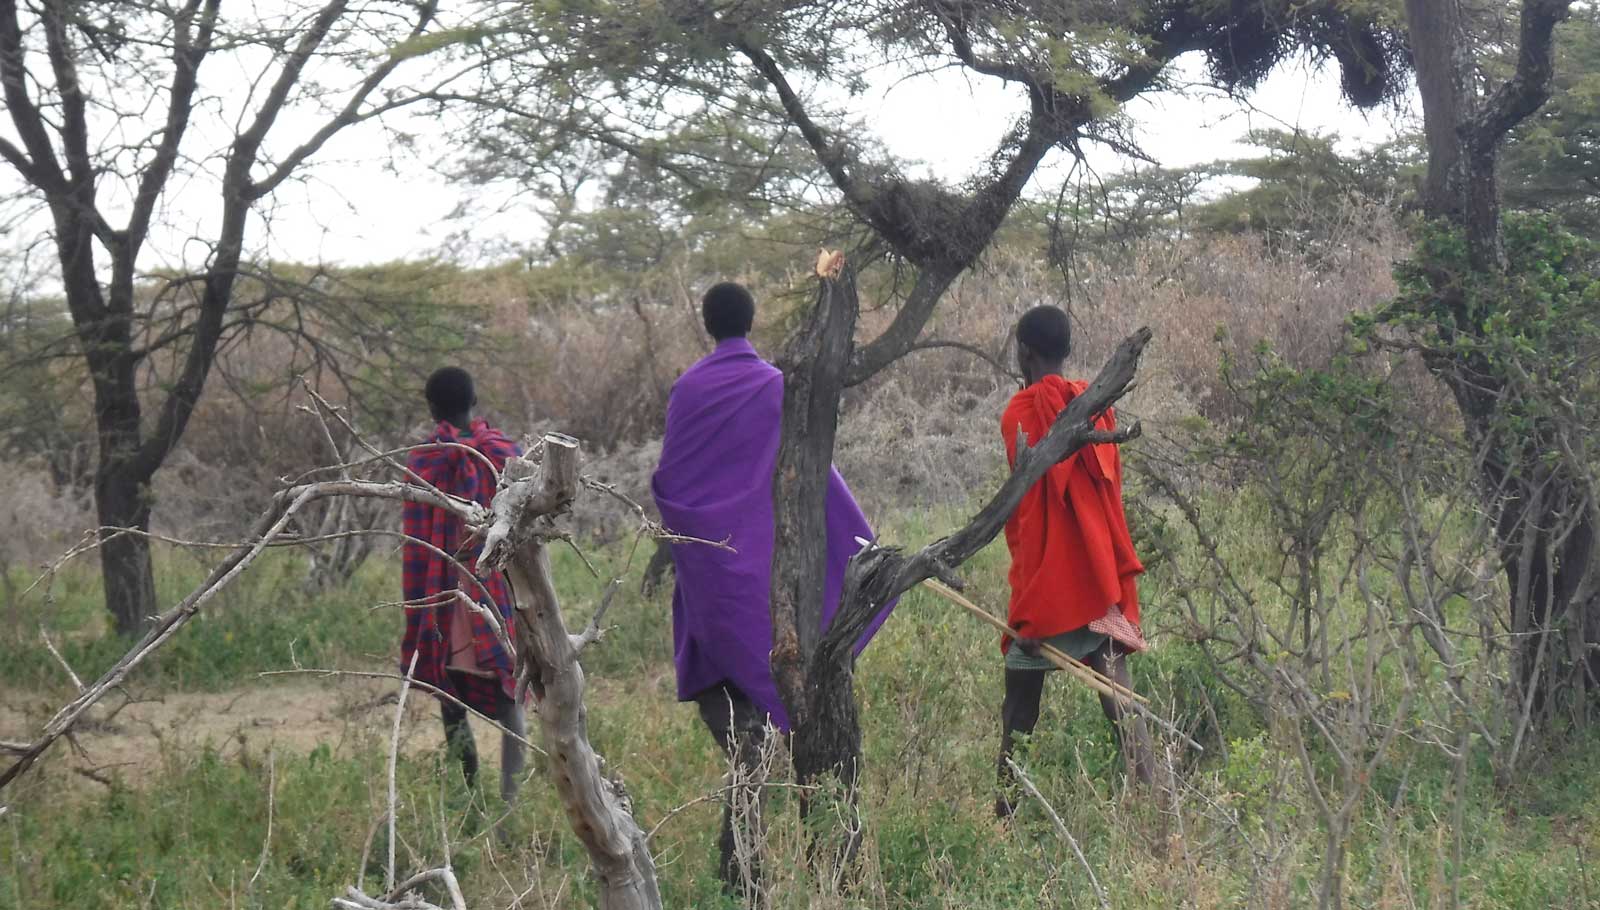 Young herders in Ngorongoro. Credit: The Oakland Institute